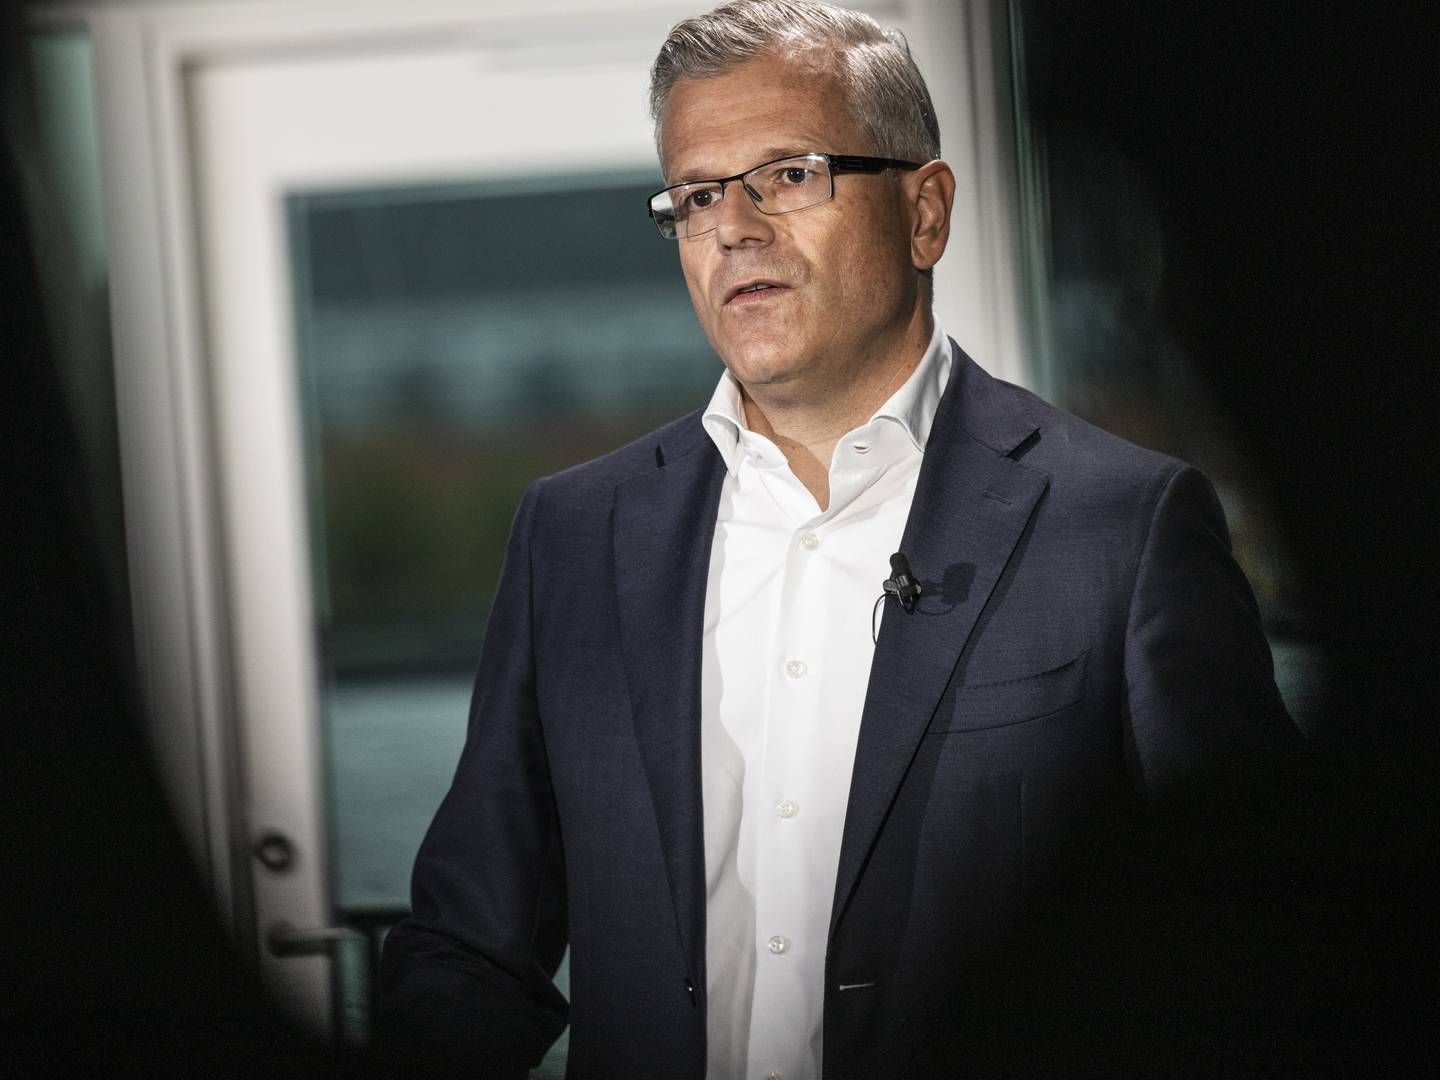 Vincent Clerc, CEO of Ocean and Logistics at A.P. Moller – Maersk, flatly denies that the shipping group is a candidate to take over the German logistics company DB Schenker. | Photo: Maersk